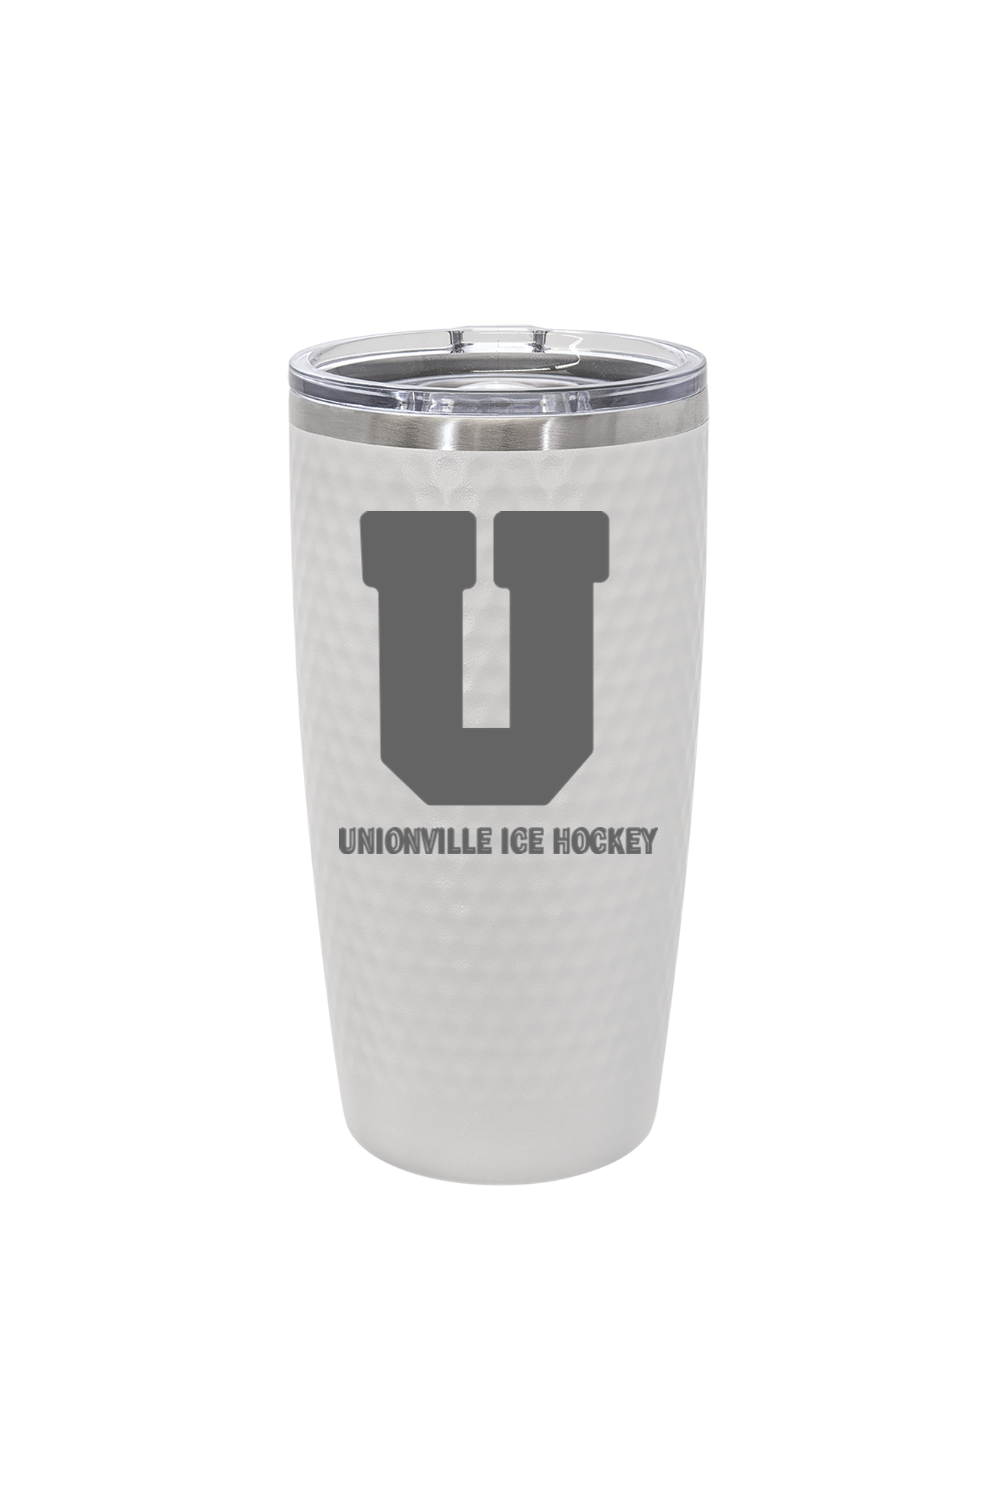 Unionville 20 oz. Golf Tumbler with Dimples and Clear Slider Lid